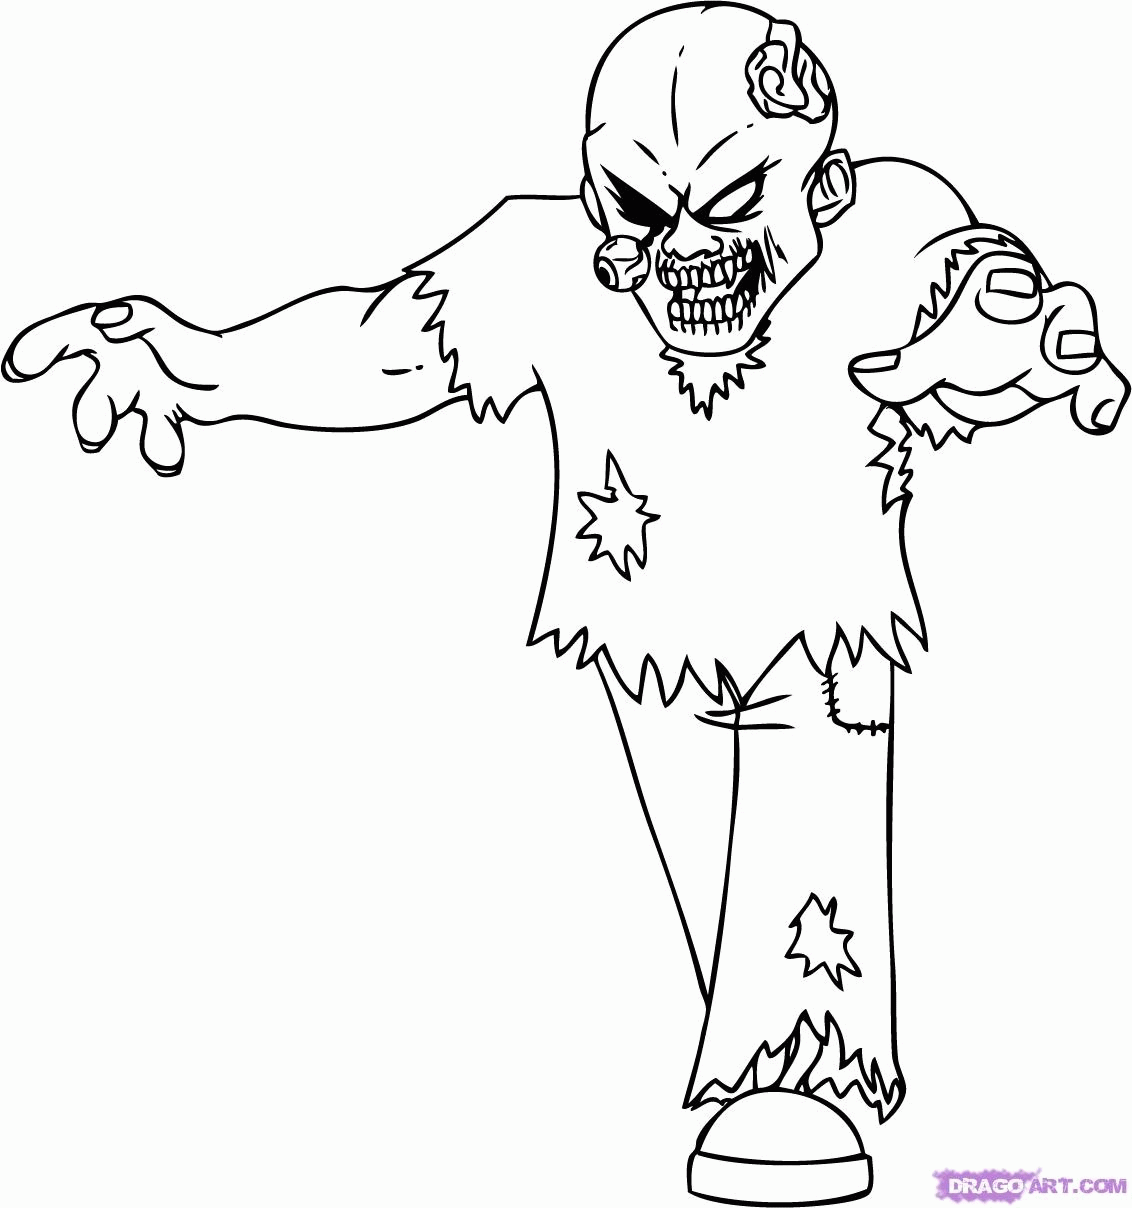 Download Minecraft Zombie Pigman Coloring Pages - Coloring Home